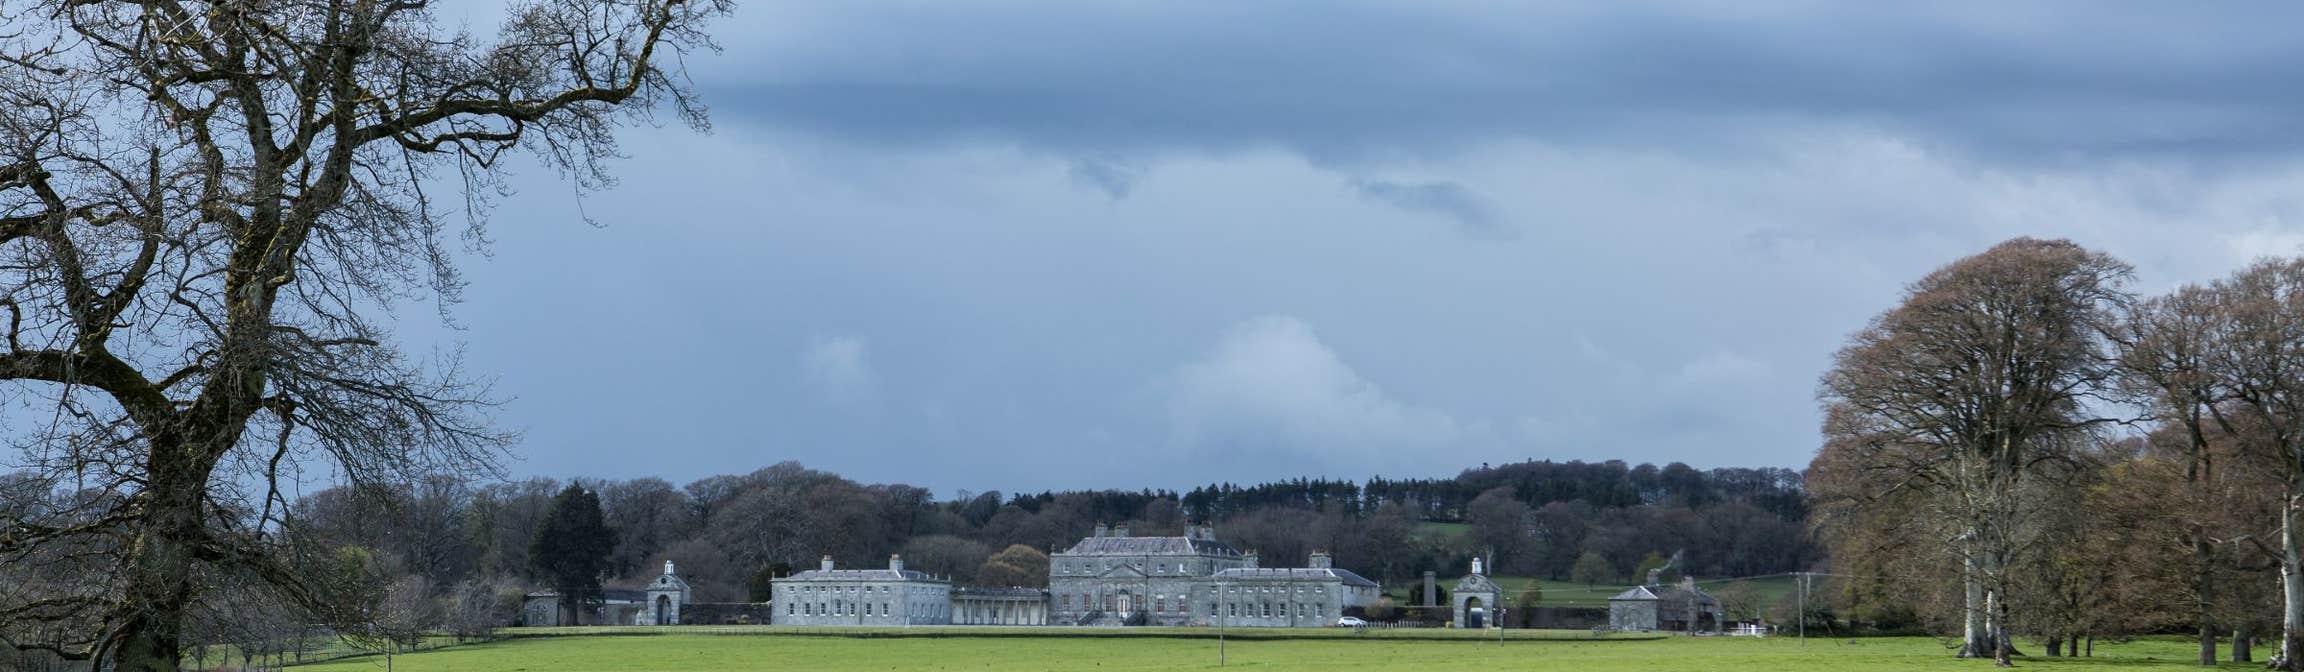 Image of Russborough House in Blessington in County Wicklow